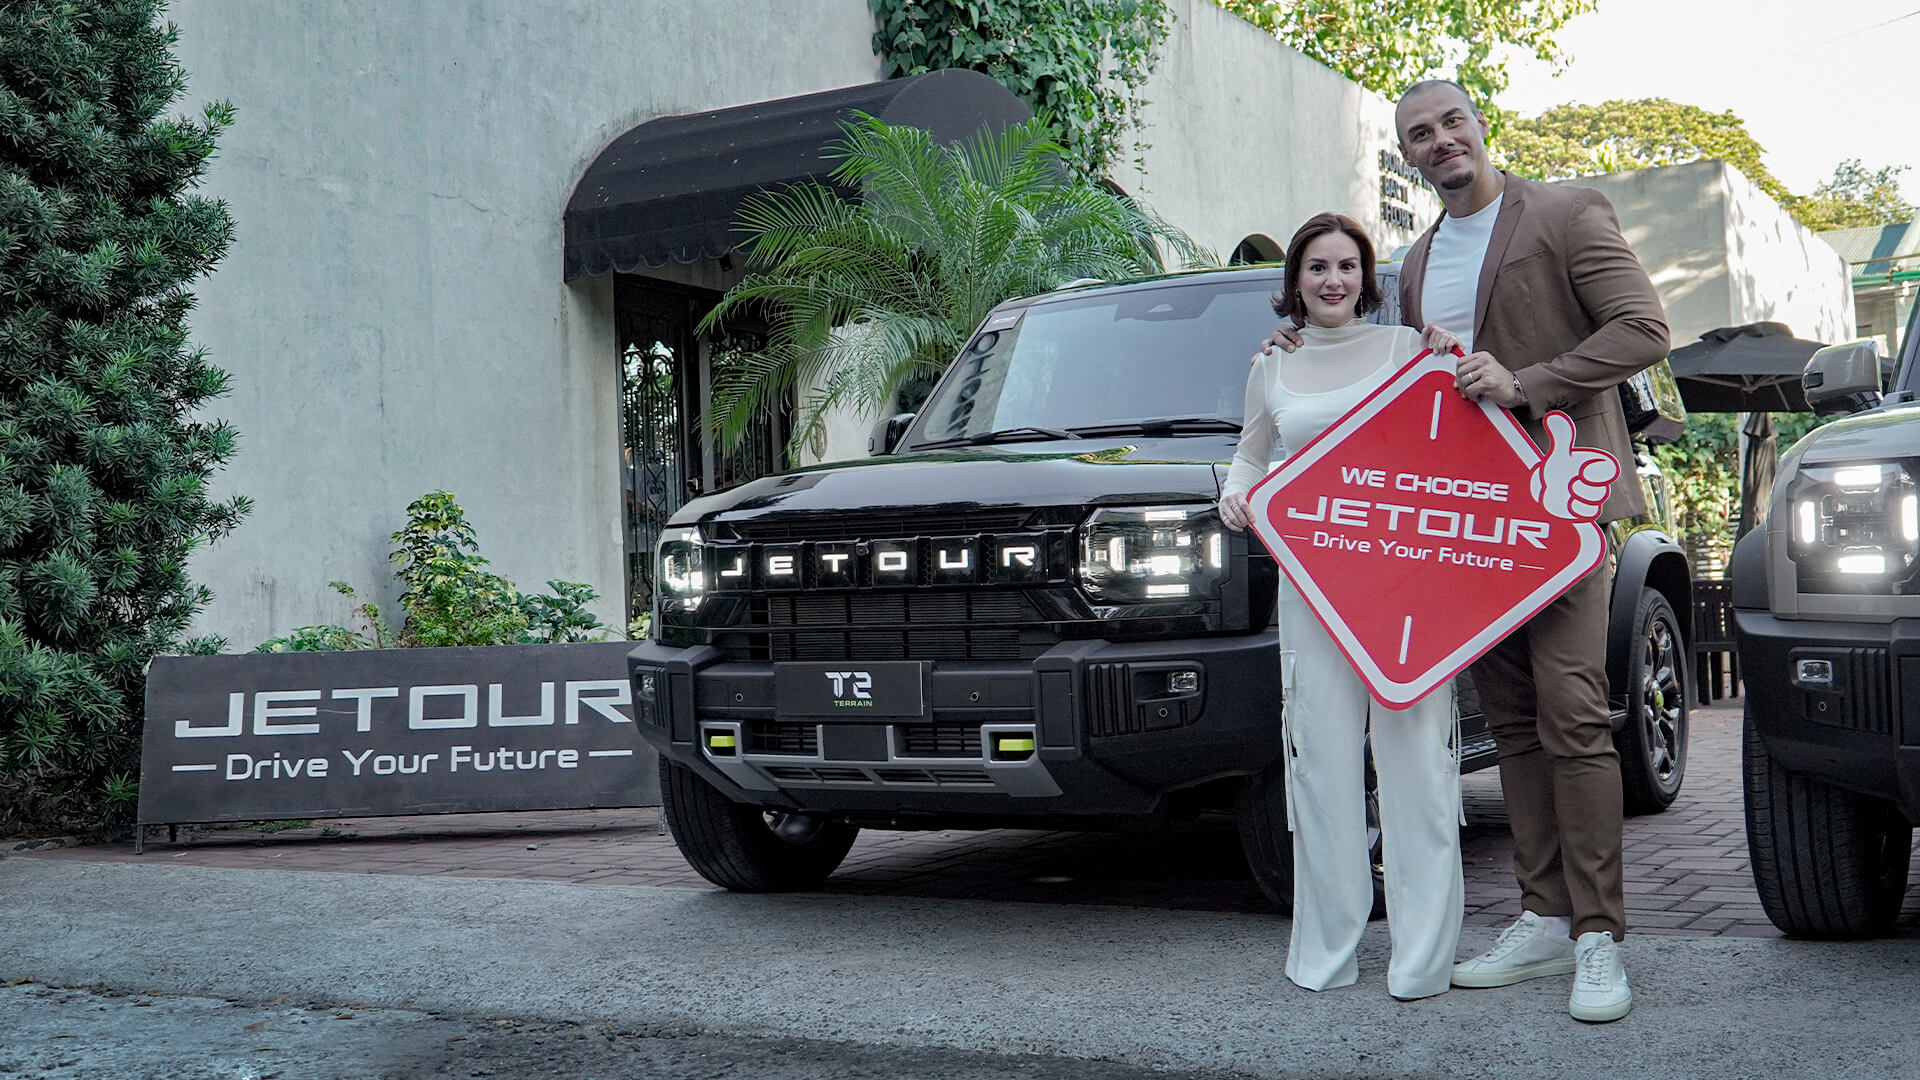 JETOUR Auto Philippines delighted to renew partnership with Team Kramer!